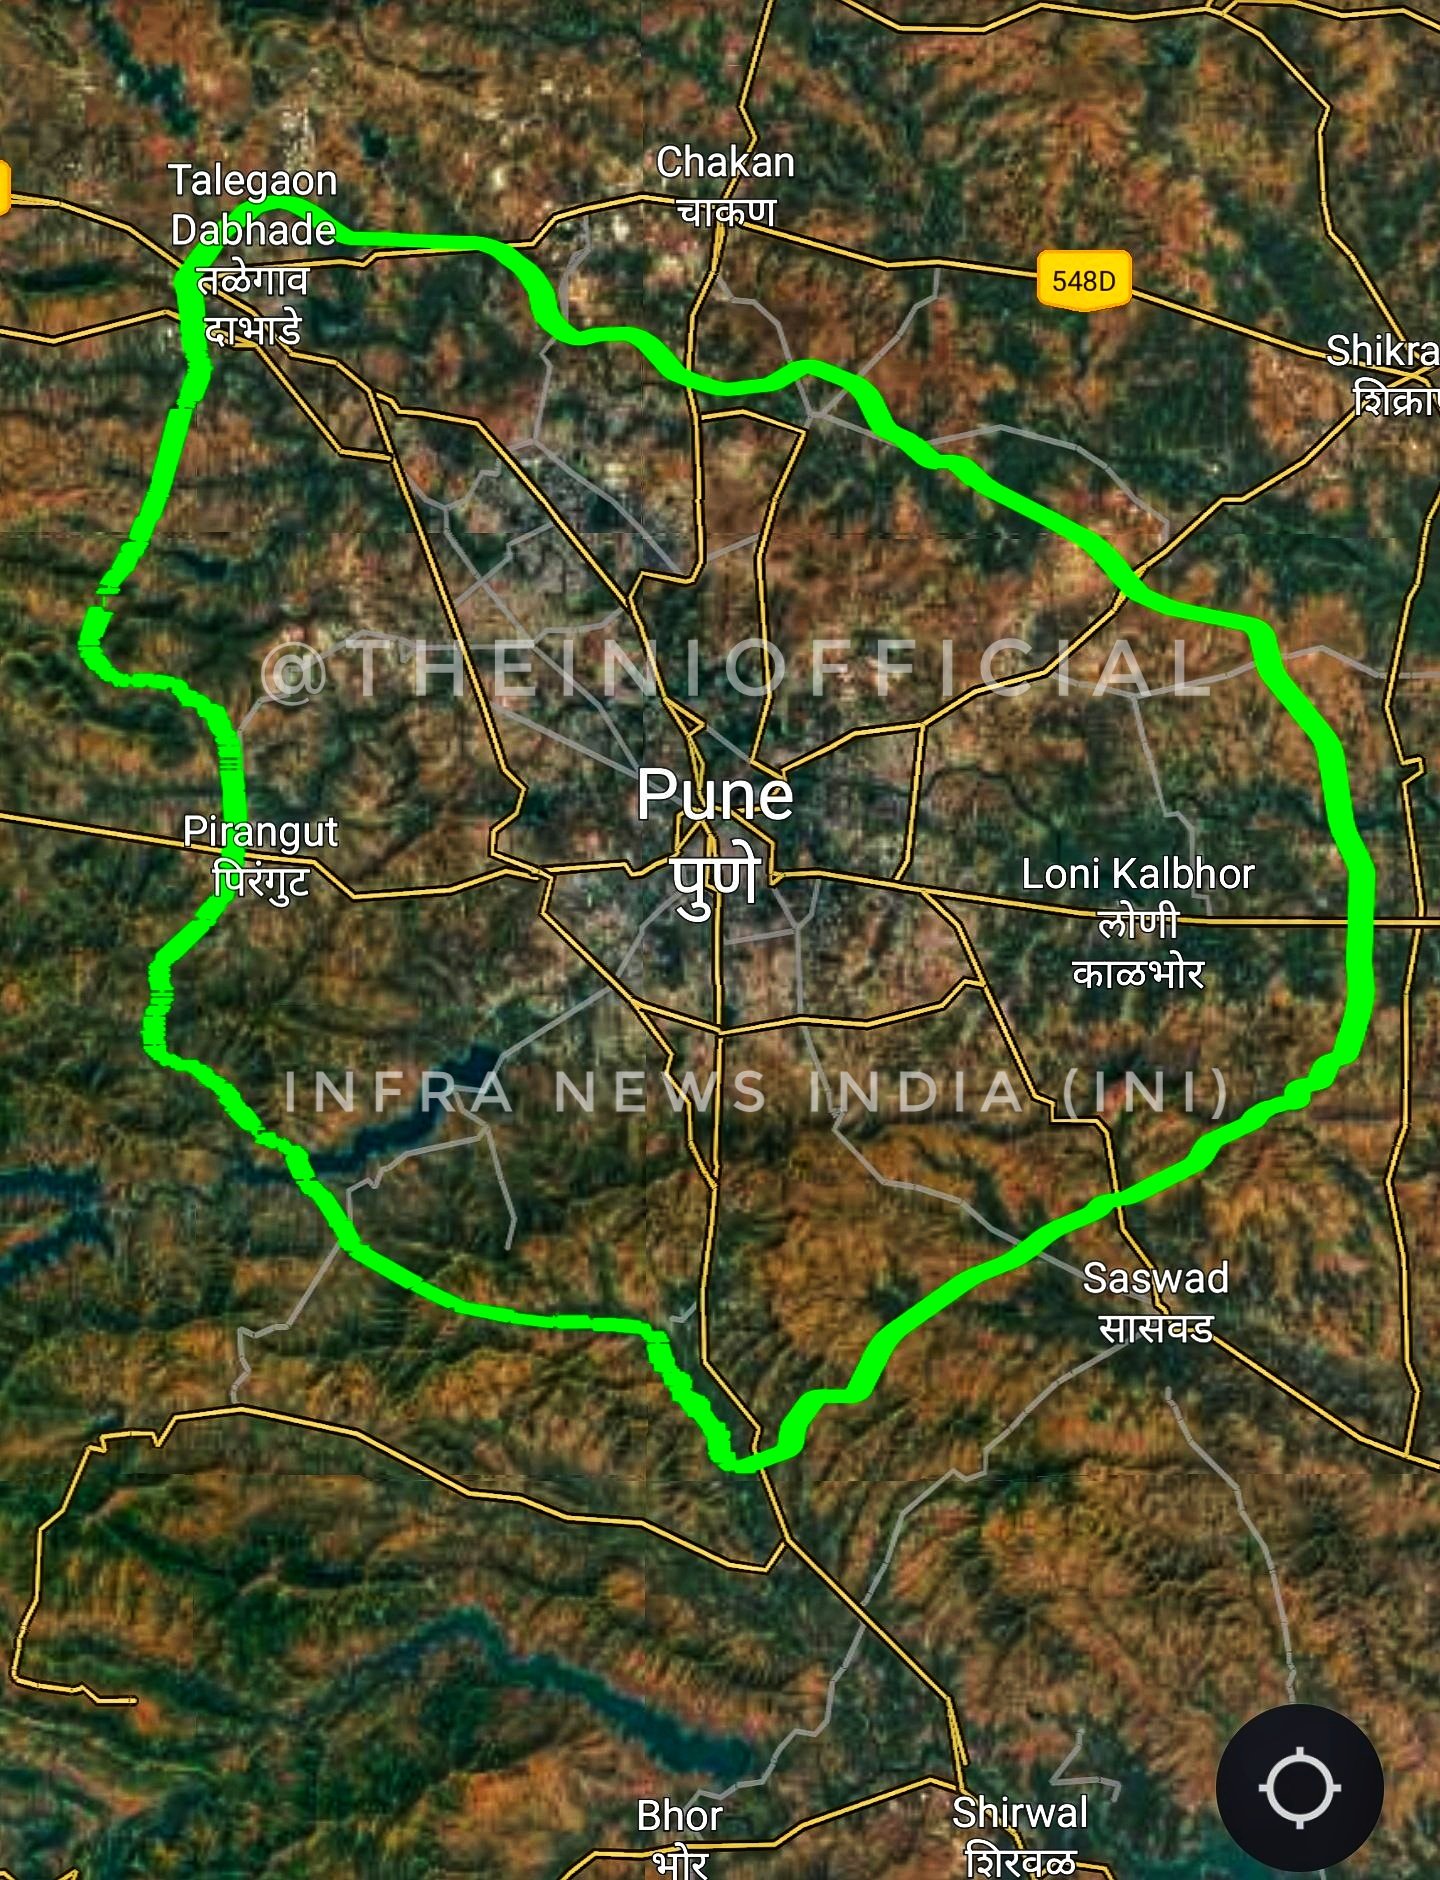 Ring road at Udaipur proposed under Bharatmala project